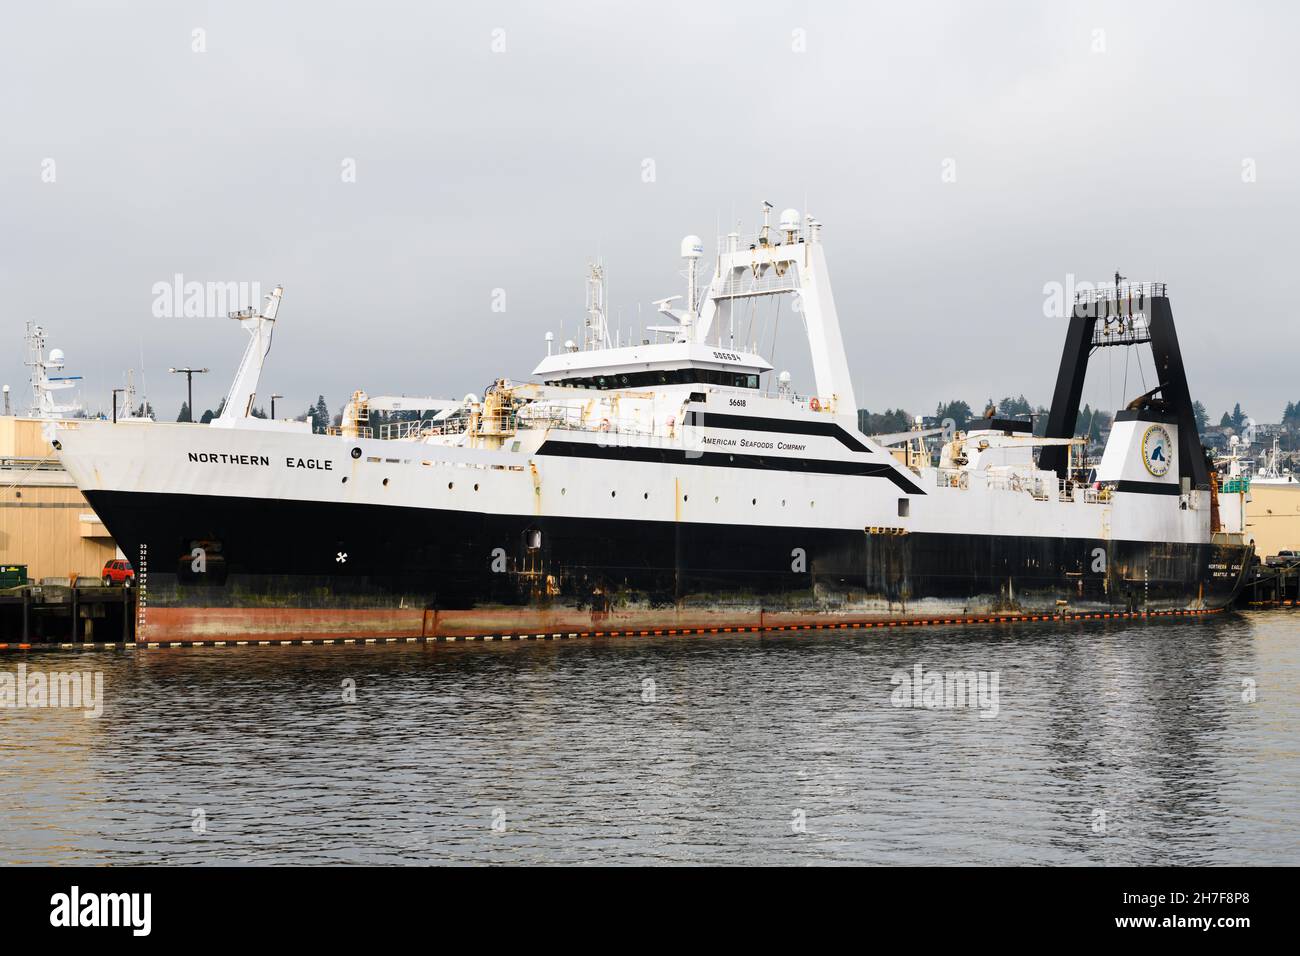 Seattle – 21. November 2021; Trawler Northern Eagle der American Seafoods Company am Dock in Interbay in Seattle. Stockfoto